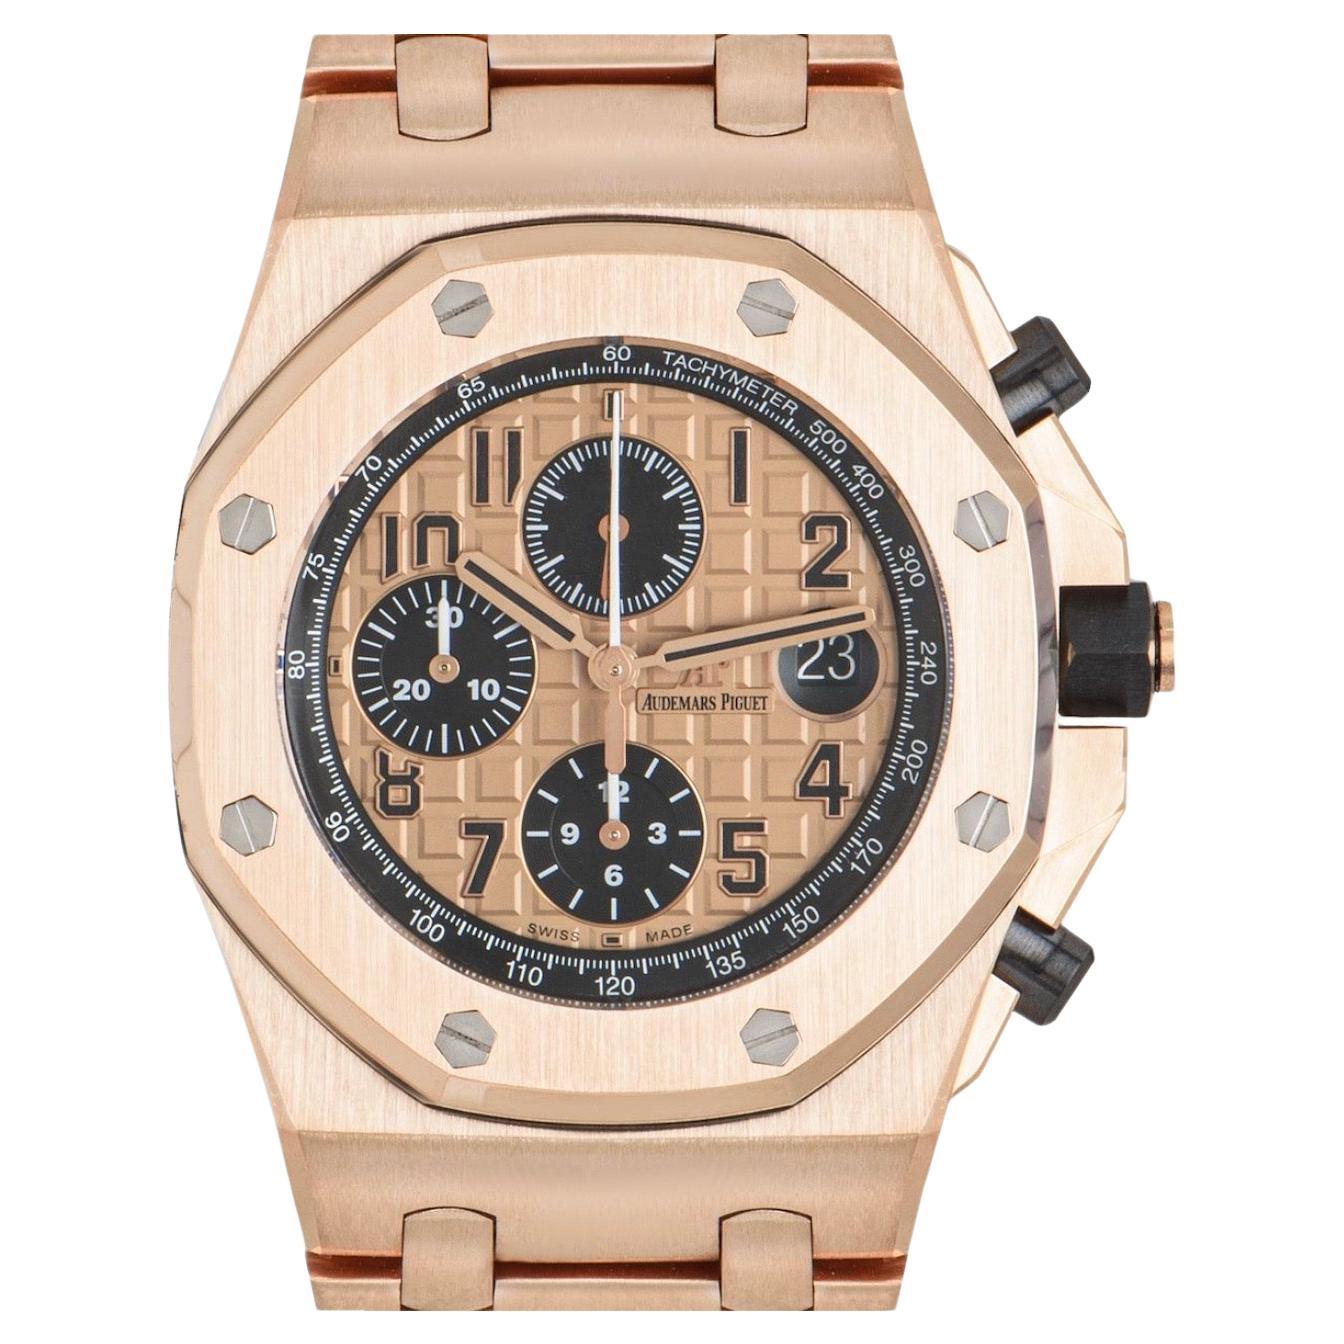 A stunning mens Royal Oak Offshore wristwatch crafted in 18k rose gold by Audemars Piguet. Features a pink-toned dial with Méga Tapisserie pattern, 3 black counters featuring a 12 hour recorder, 30 minutes recorder, a small seconds and a date